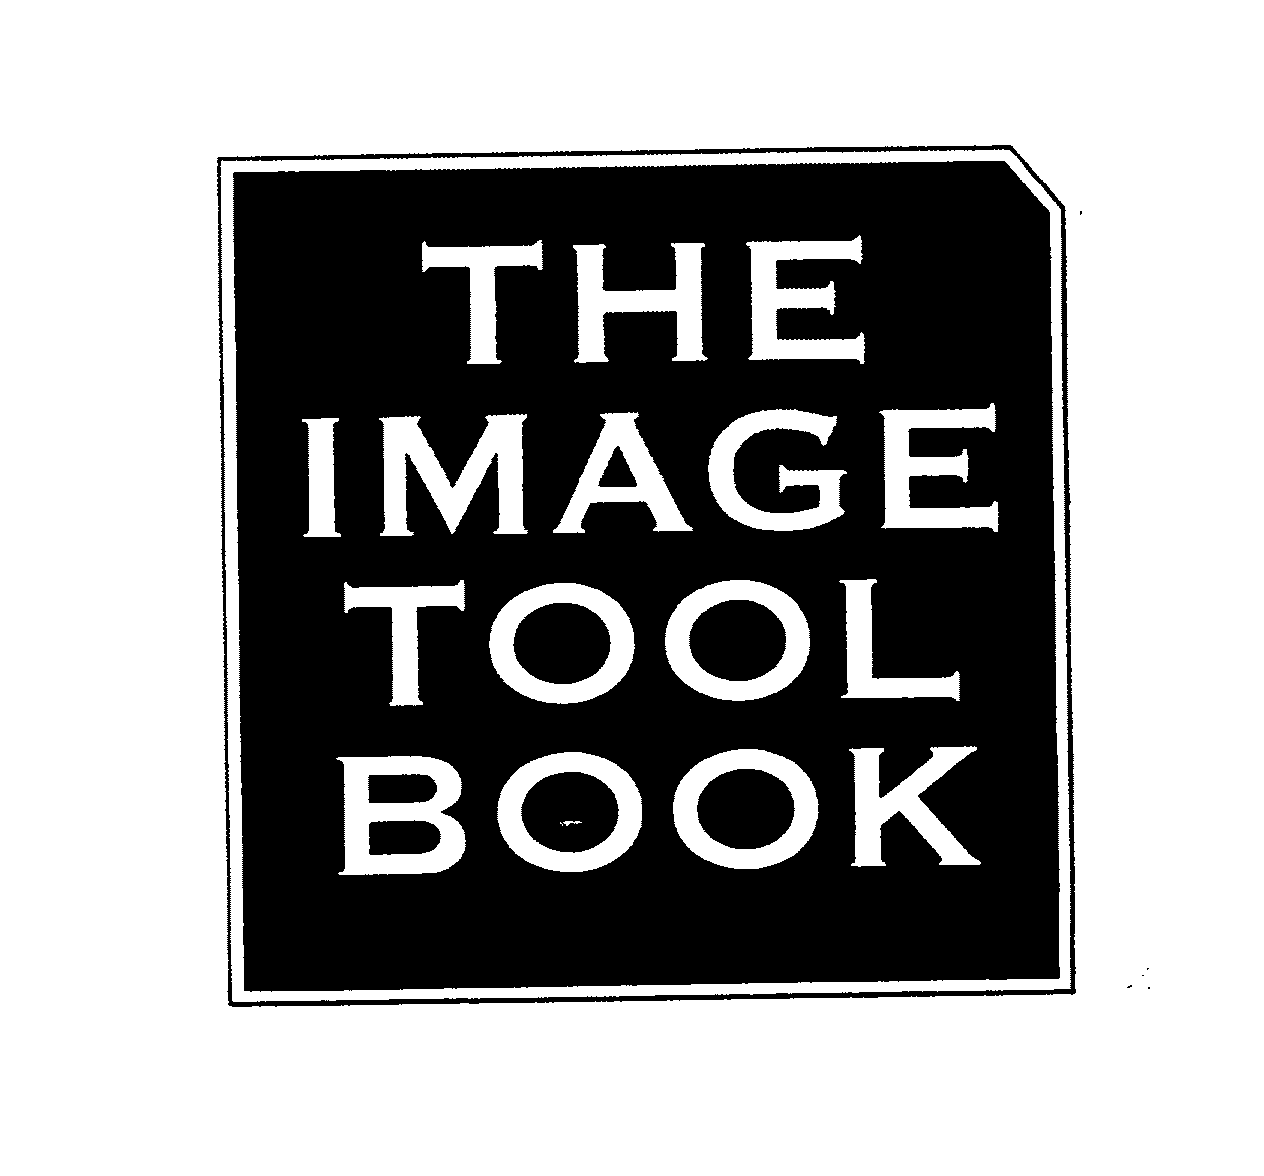  THE IMAGE TOOL BOOK